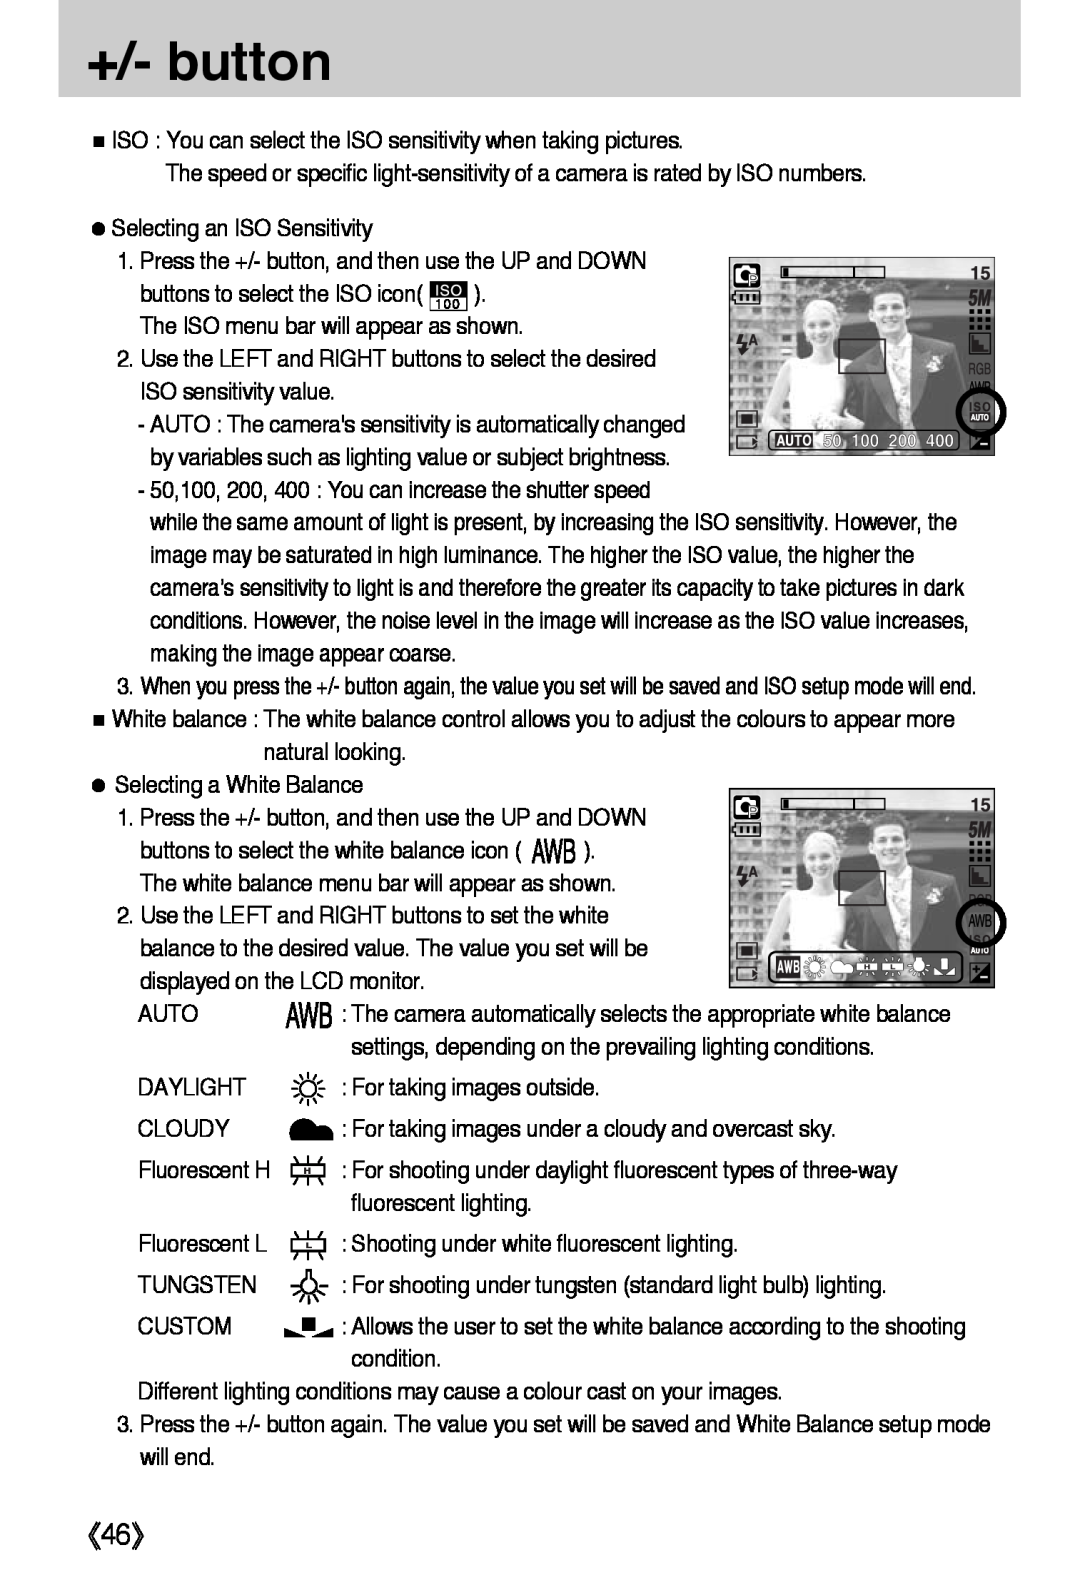 Samsung L50 user manual 《46》, +/- button, buttons to select the white balance icon 